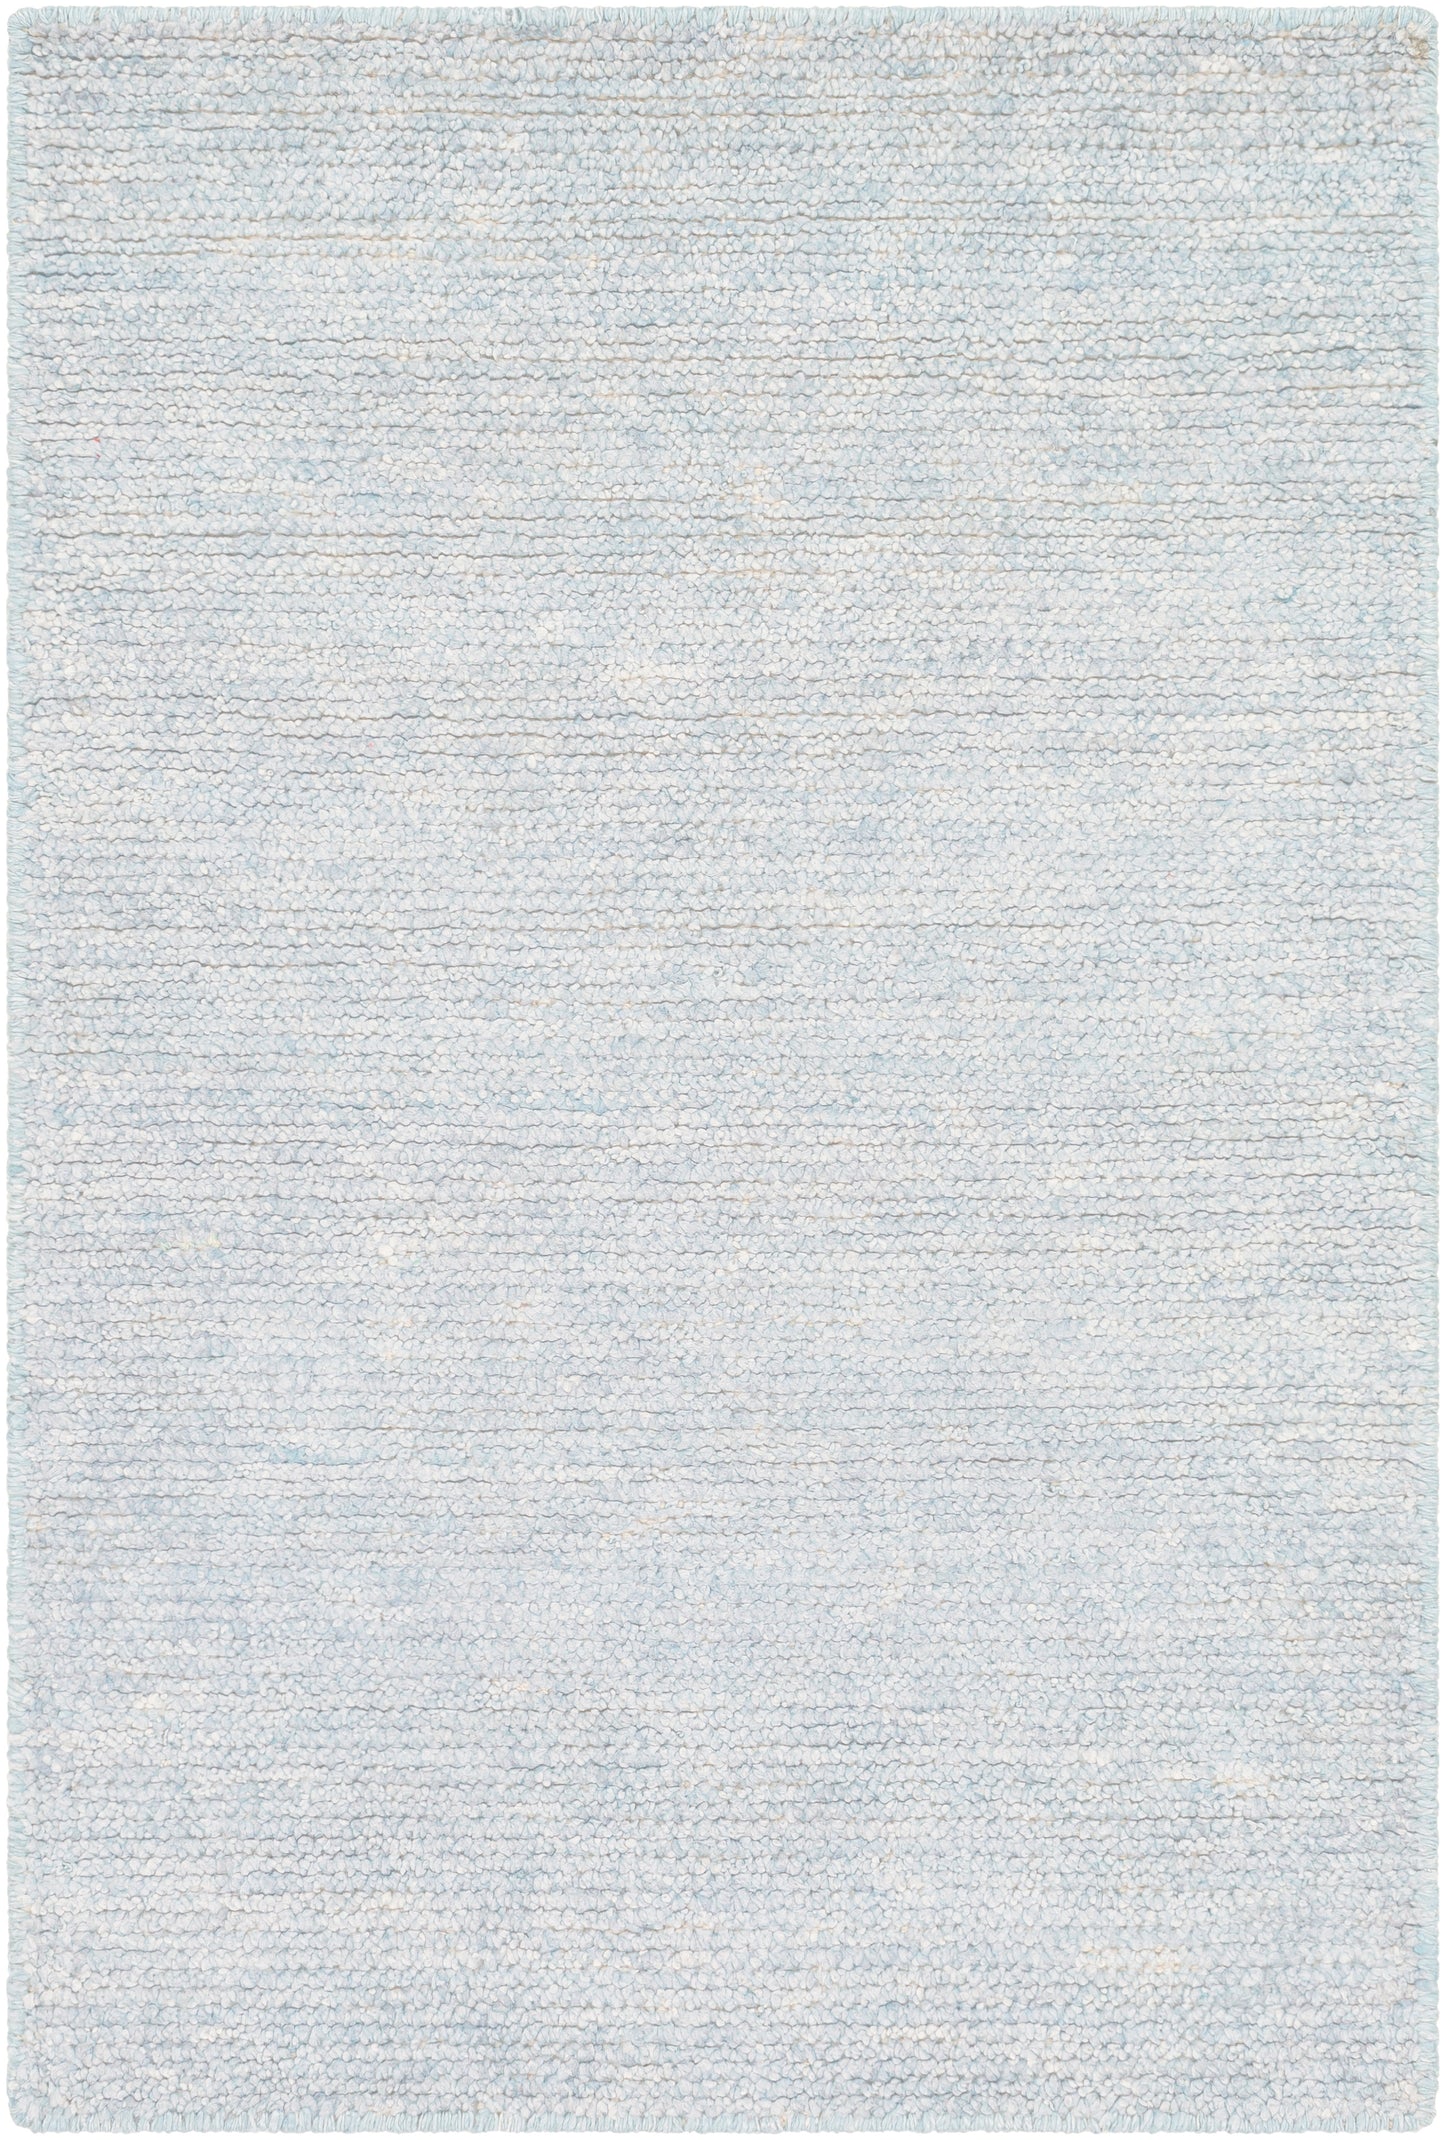 Calm 23798 Hand Woven Synthetic Blend Indoor Area Rug by Surya Rugs